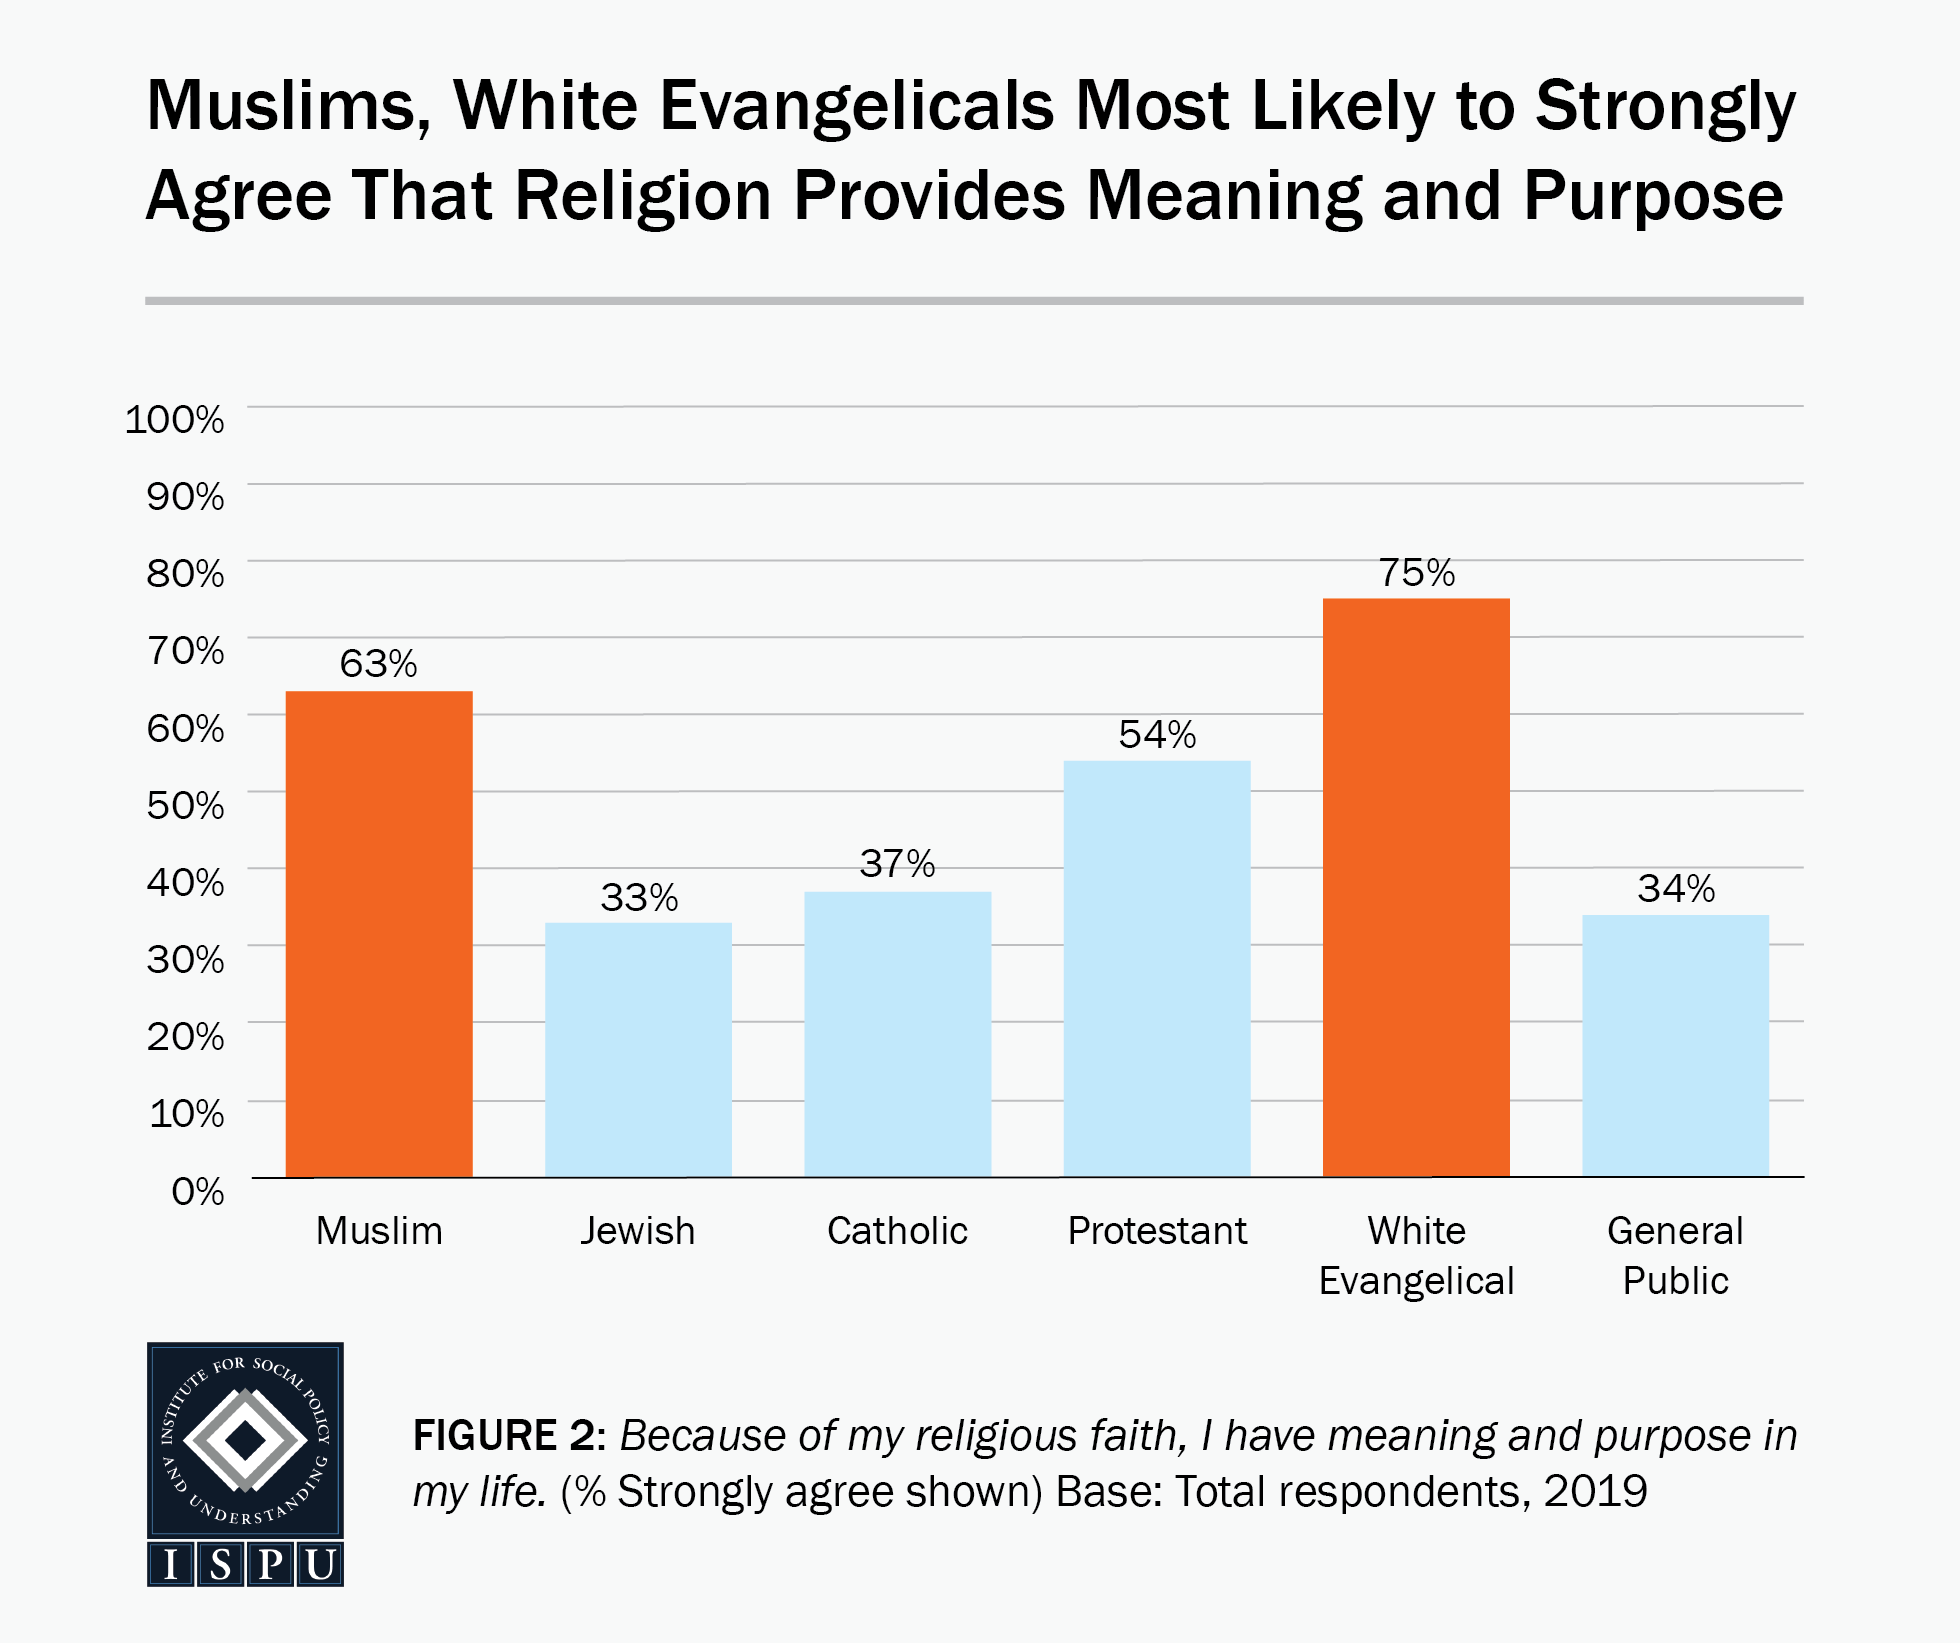 Figure 2: A bar graph showing that Muslims (63%) and white Evangelicals (75%) are the most likely faith groups to strongly agree that religion provides meaning and purpose in their lives